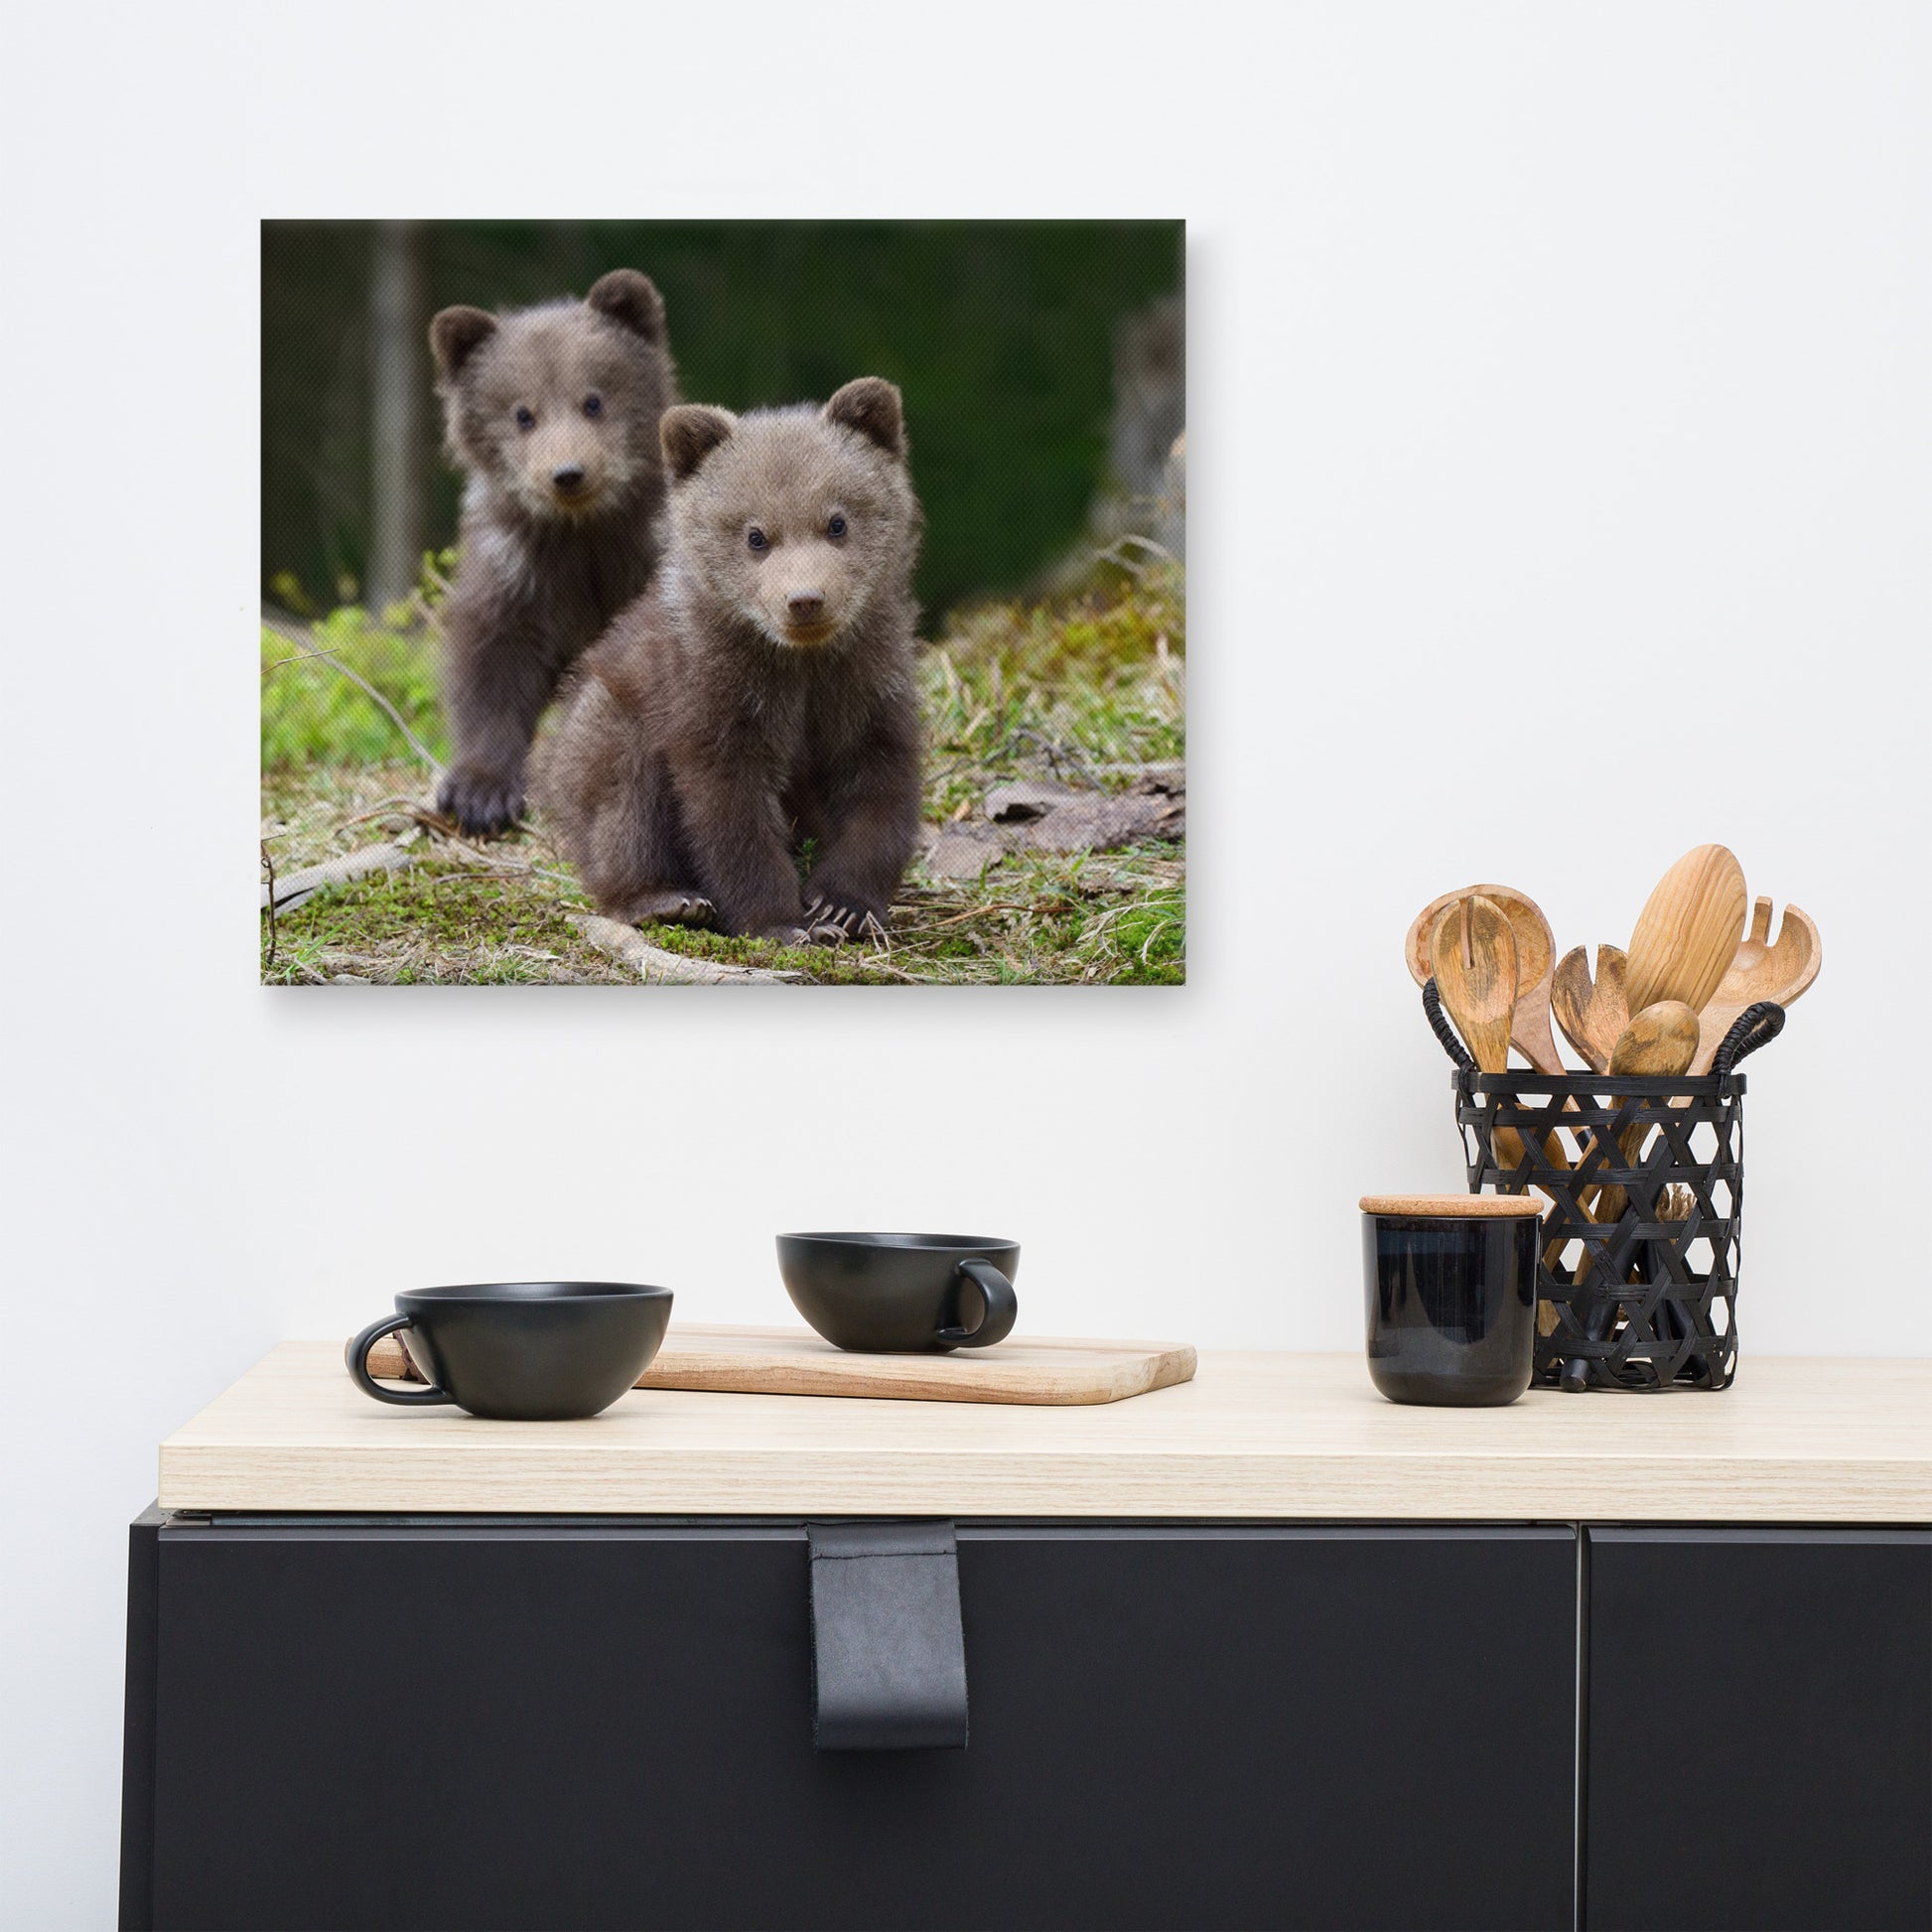 Simple Nursery Art: Adorable Cubs In The Trees - Wildlife / Animal / Nature Photograph Canvas Wall Art Print - Artwork